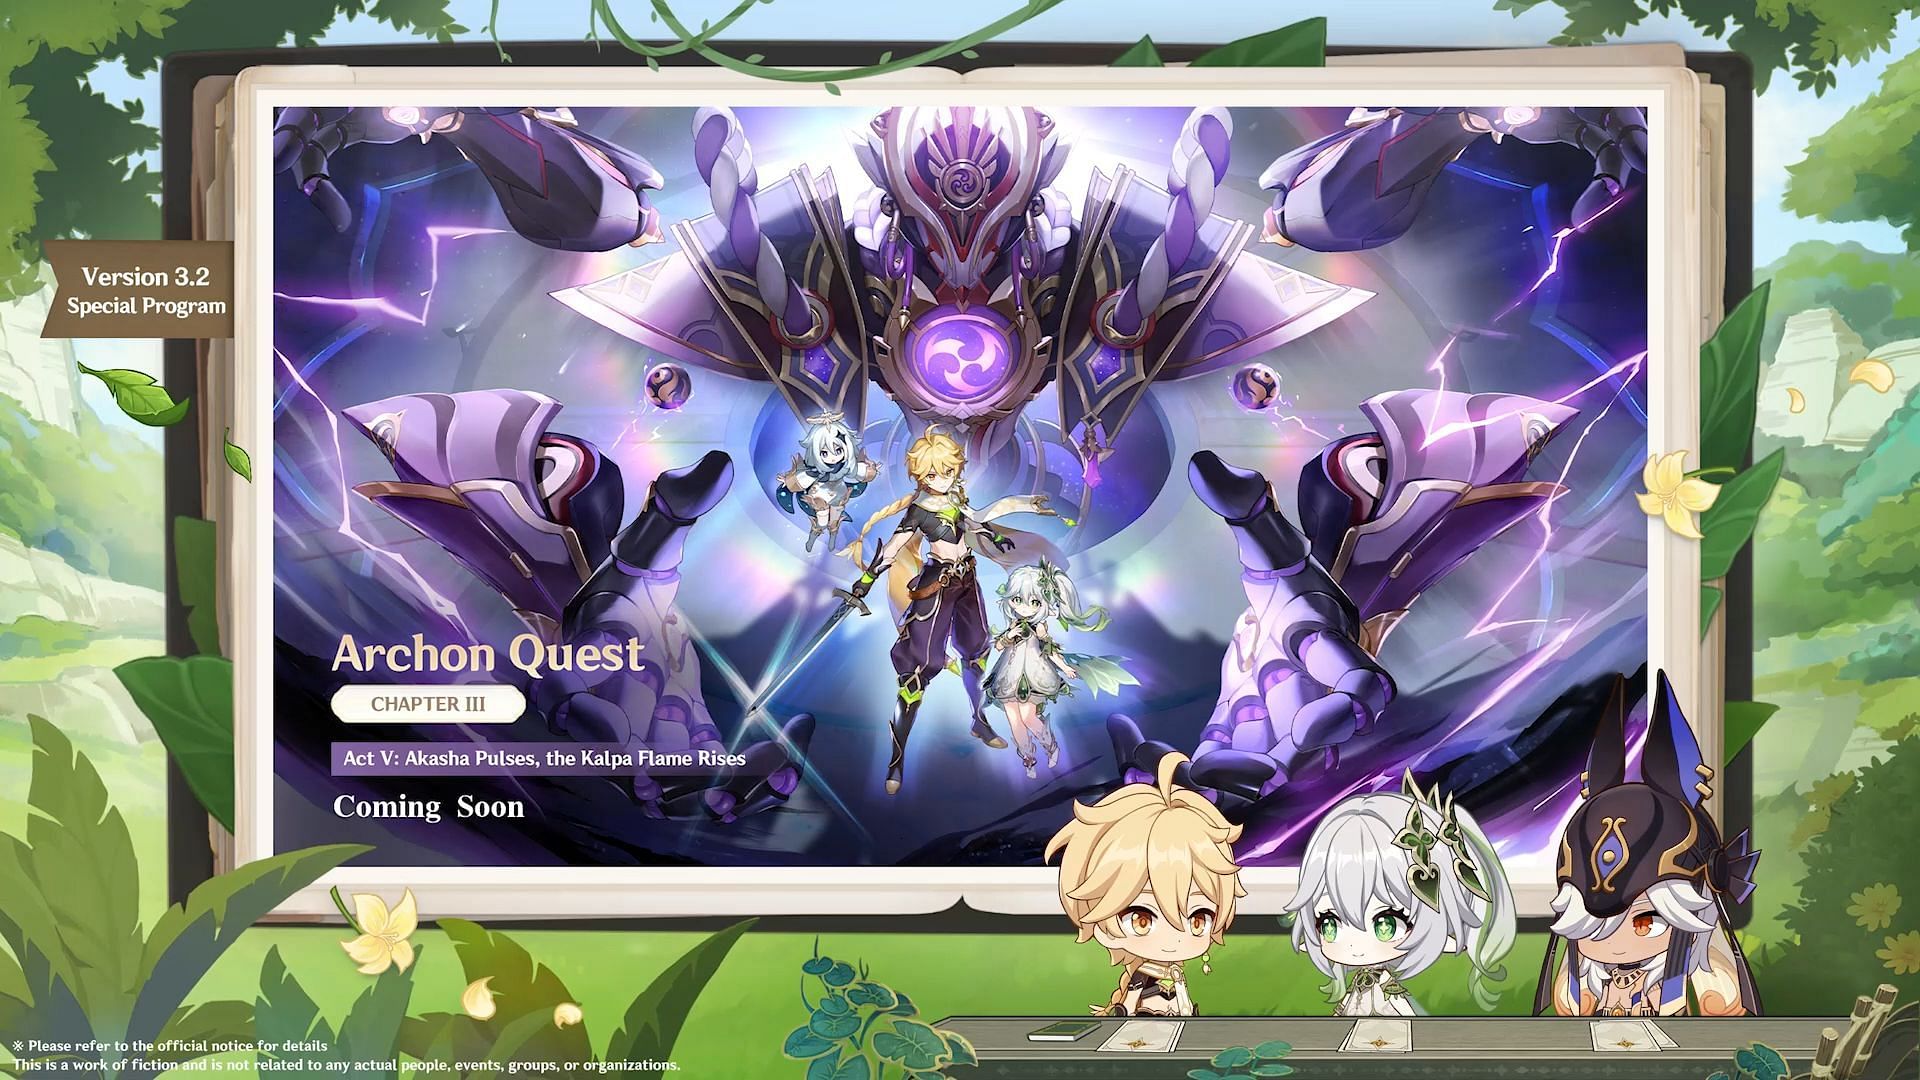 One of the new events in version 3.2 is the Archon Quest (Image via HoYoverse)